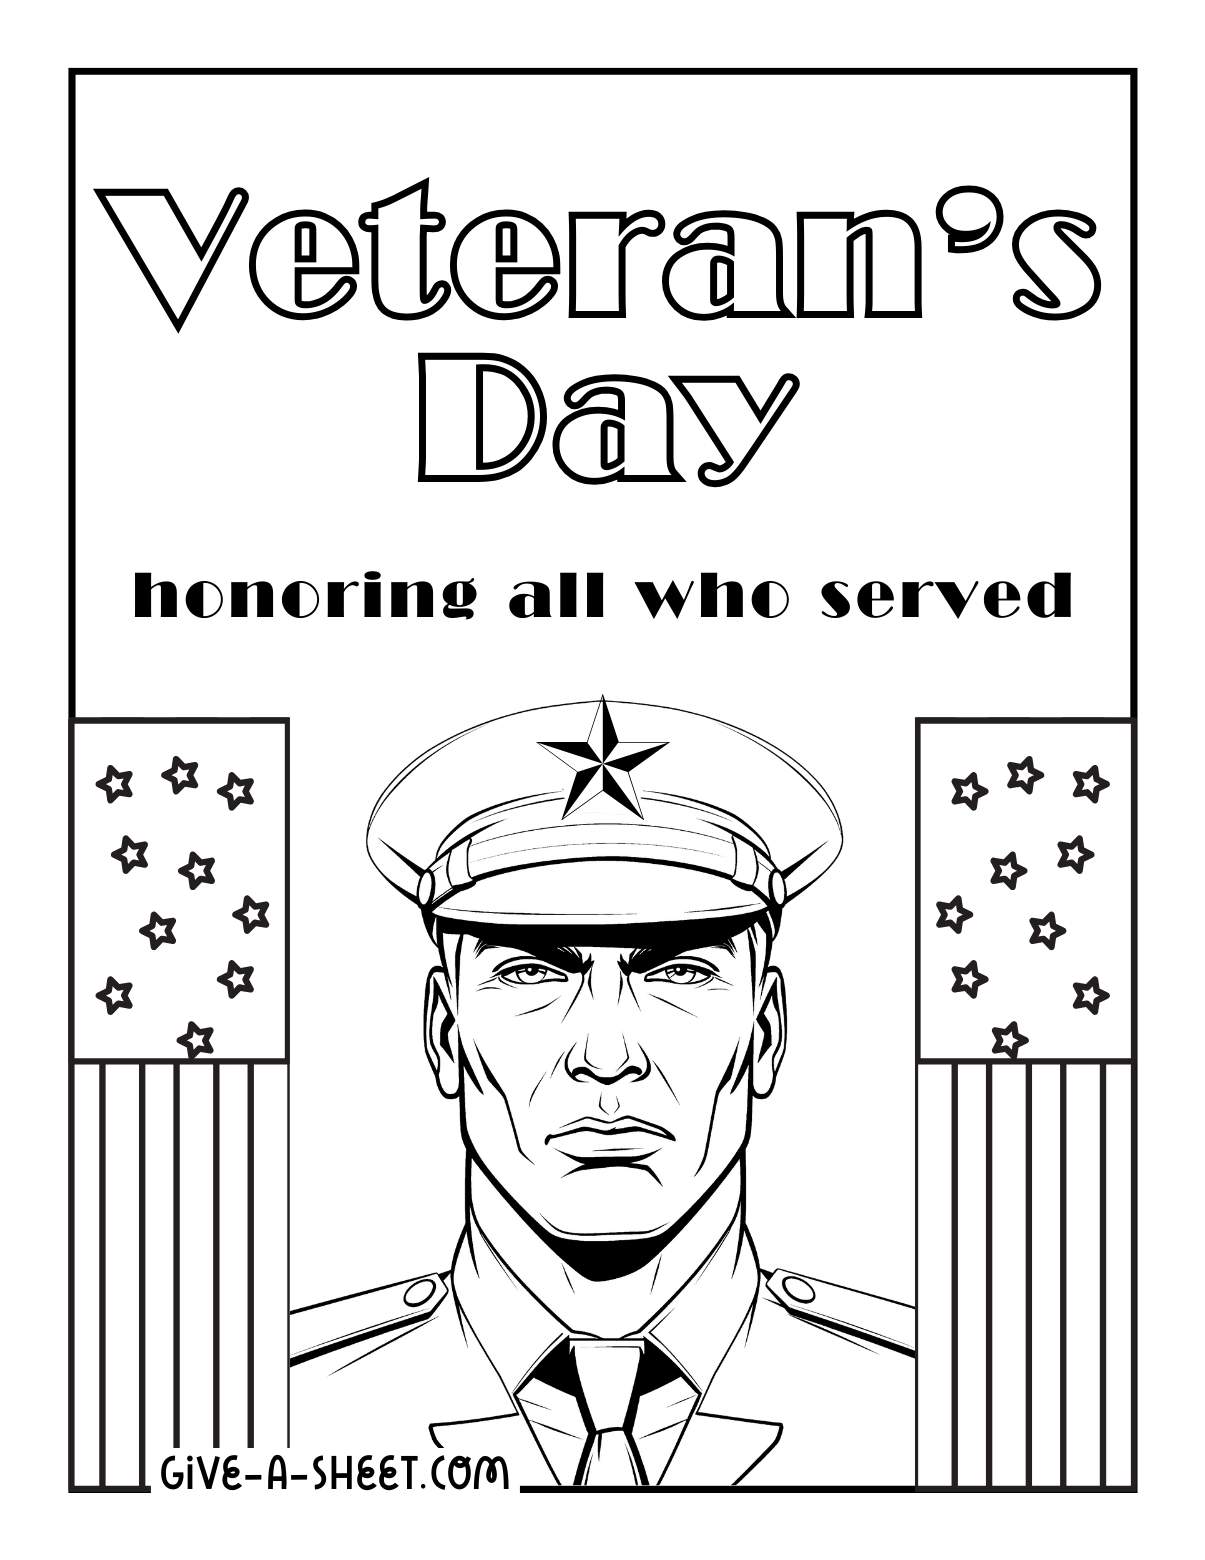 Military uniform veterans day coloring page.